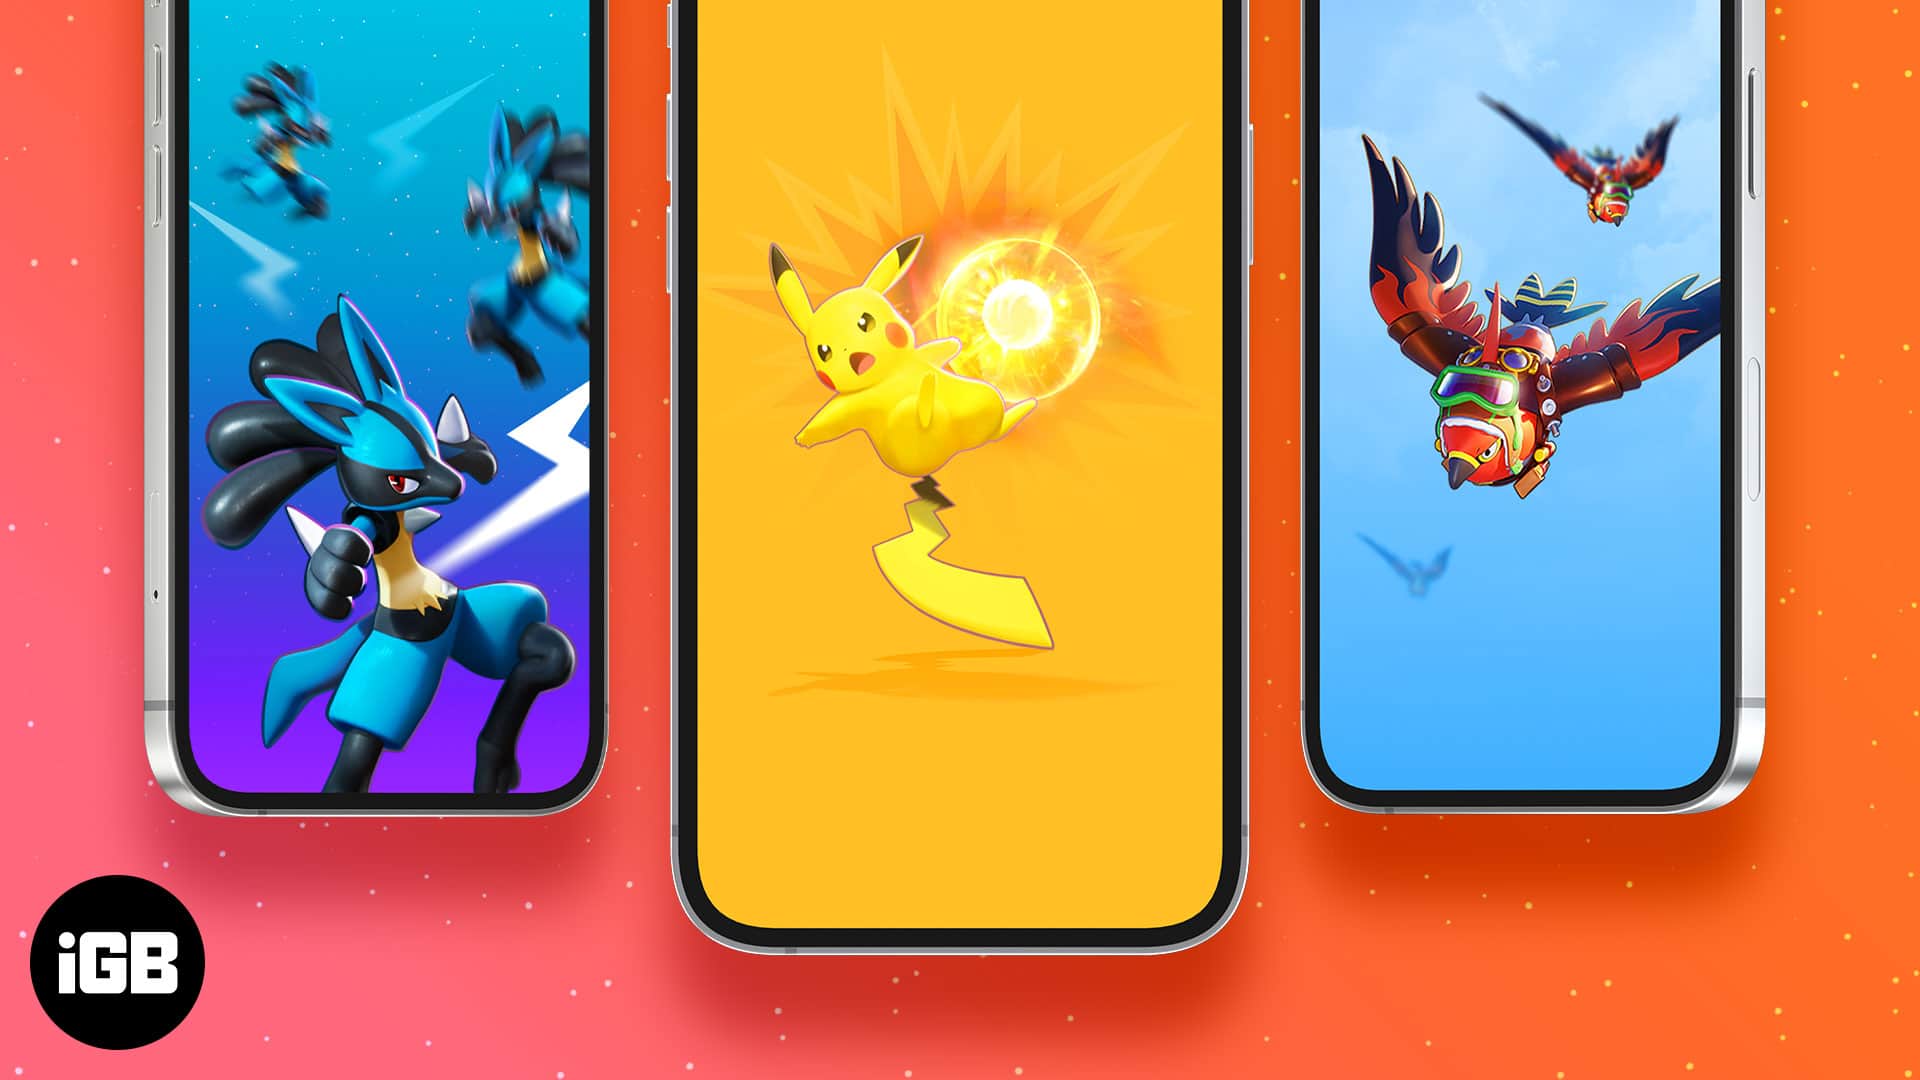 Download Pokémon wallpapers for iPhone